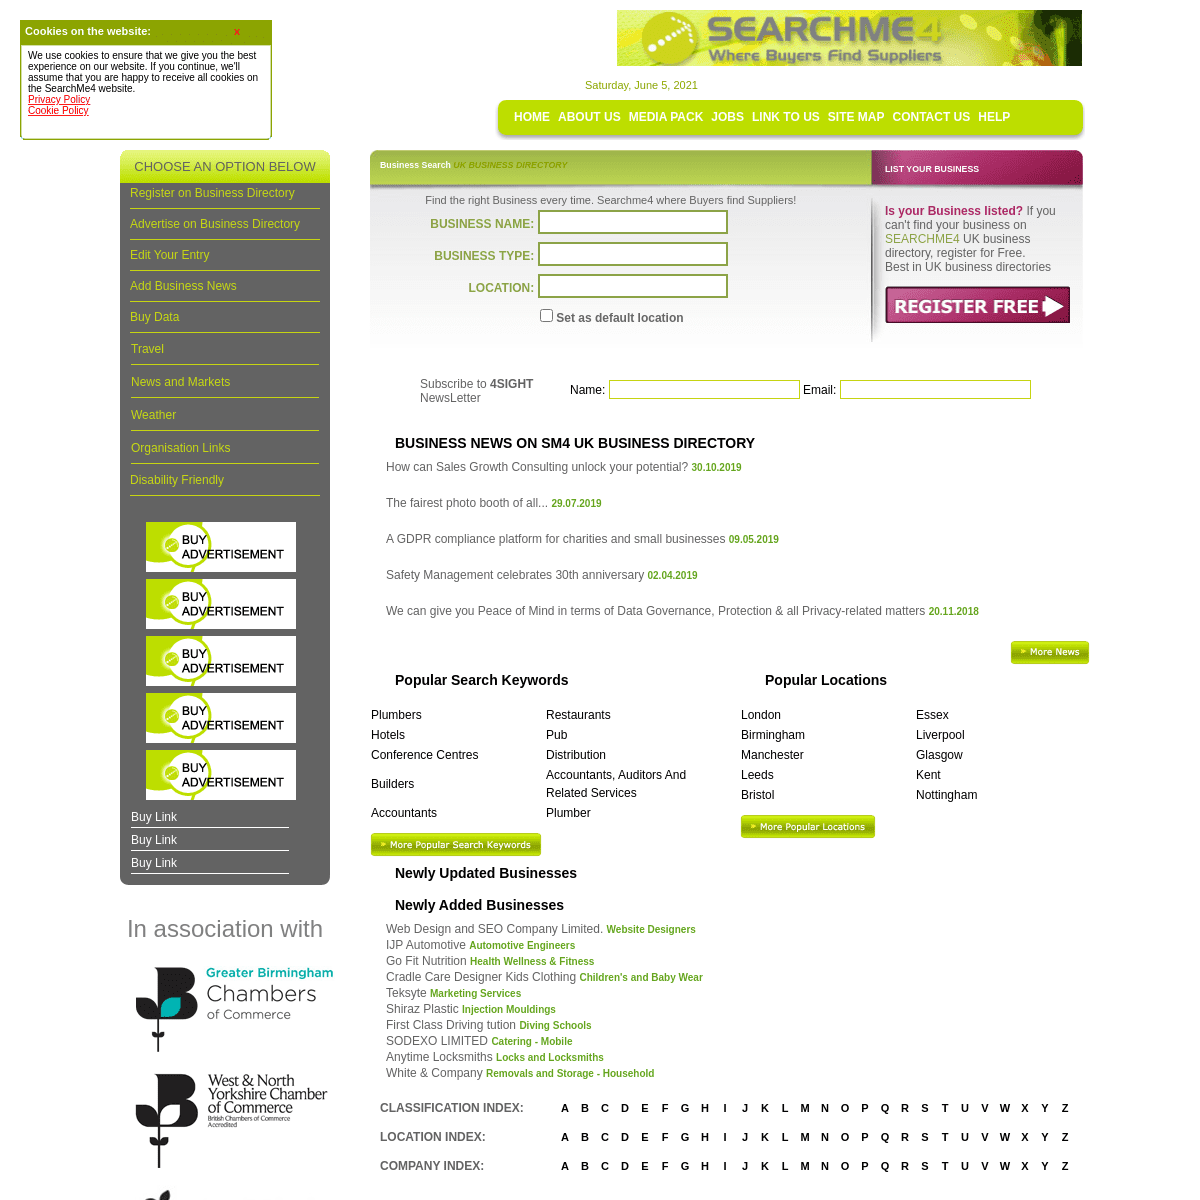 A complete backup of https://searchme4.co.uk